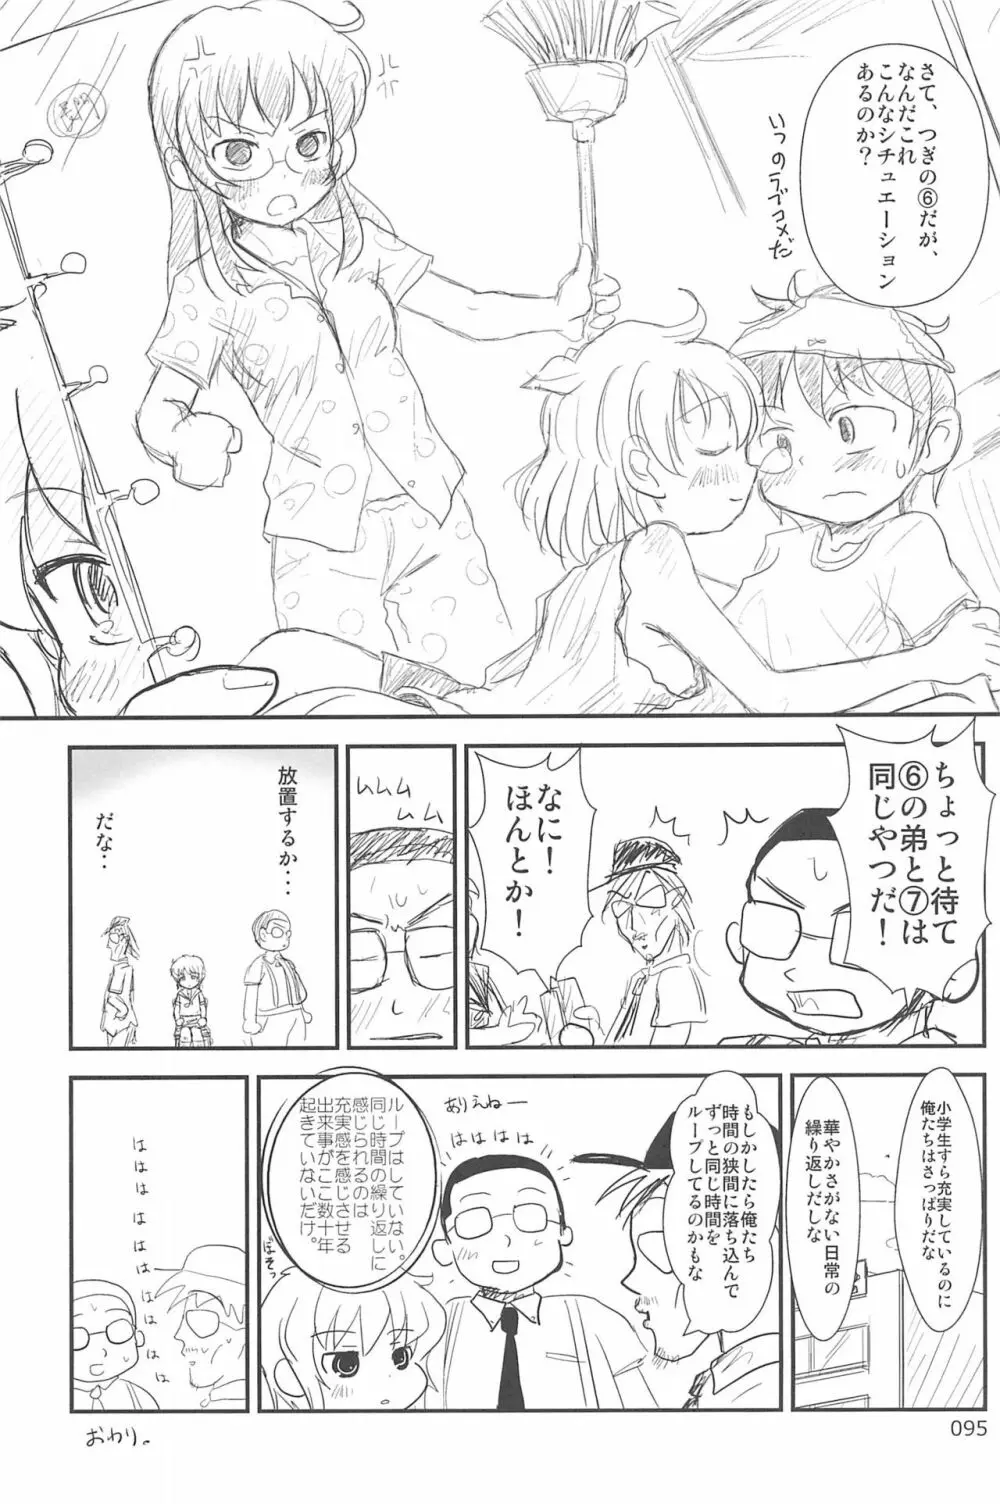 ND-special Volume 6 95ページ